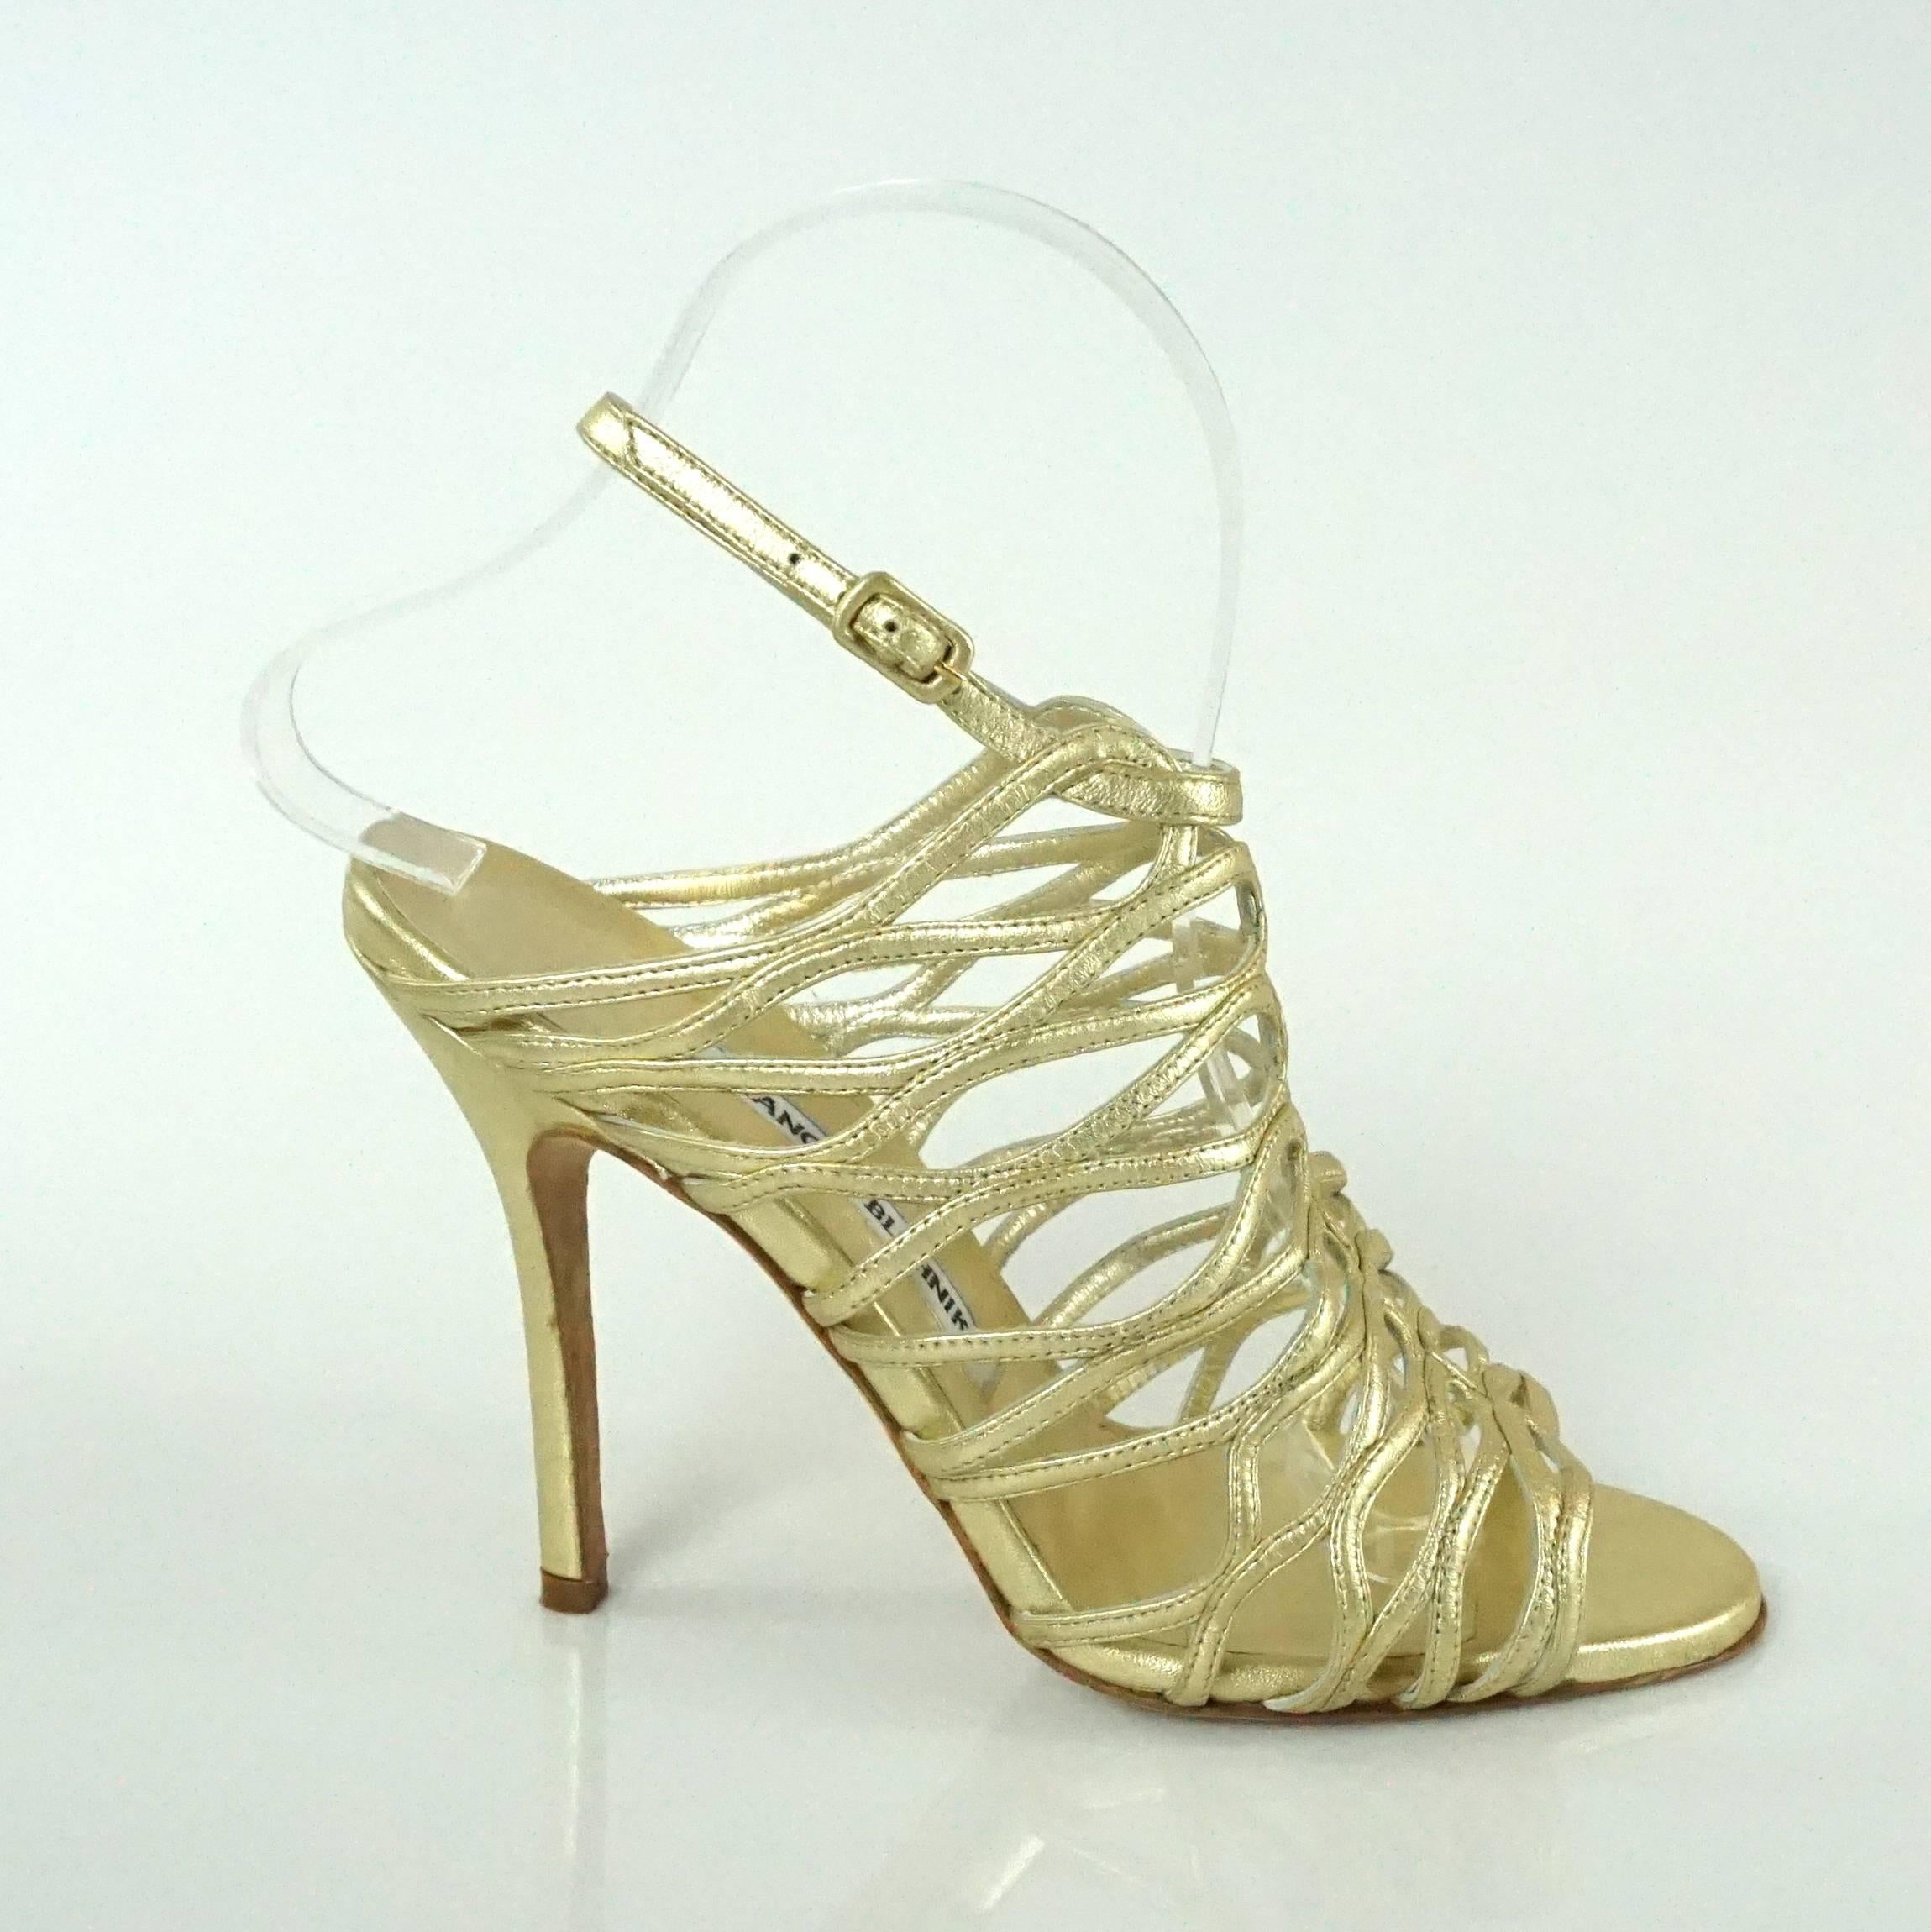 Manolo Blahnik Gold Leather Caged Heels - 37. These heels are new and have never been worn; they come with a duster and the box. They have a cutout, caged look with an ankle strap and are truly gorgeous.

Heel Height: 4.25